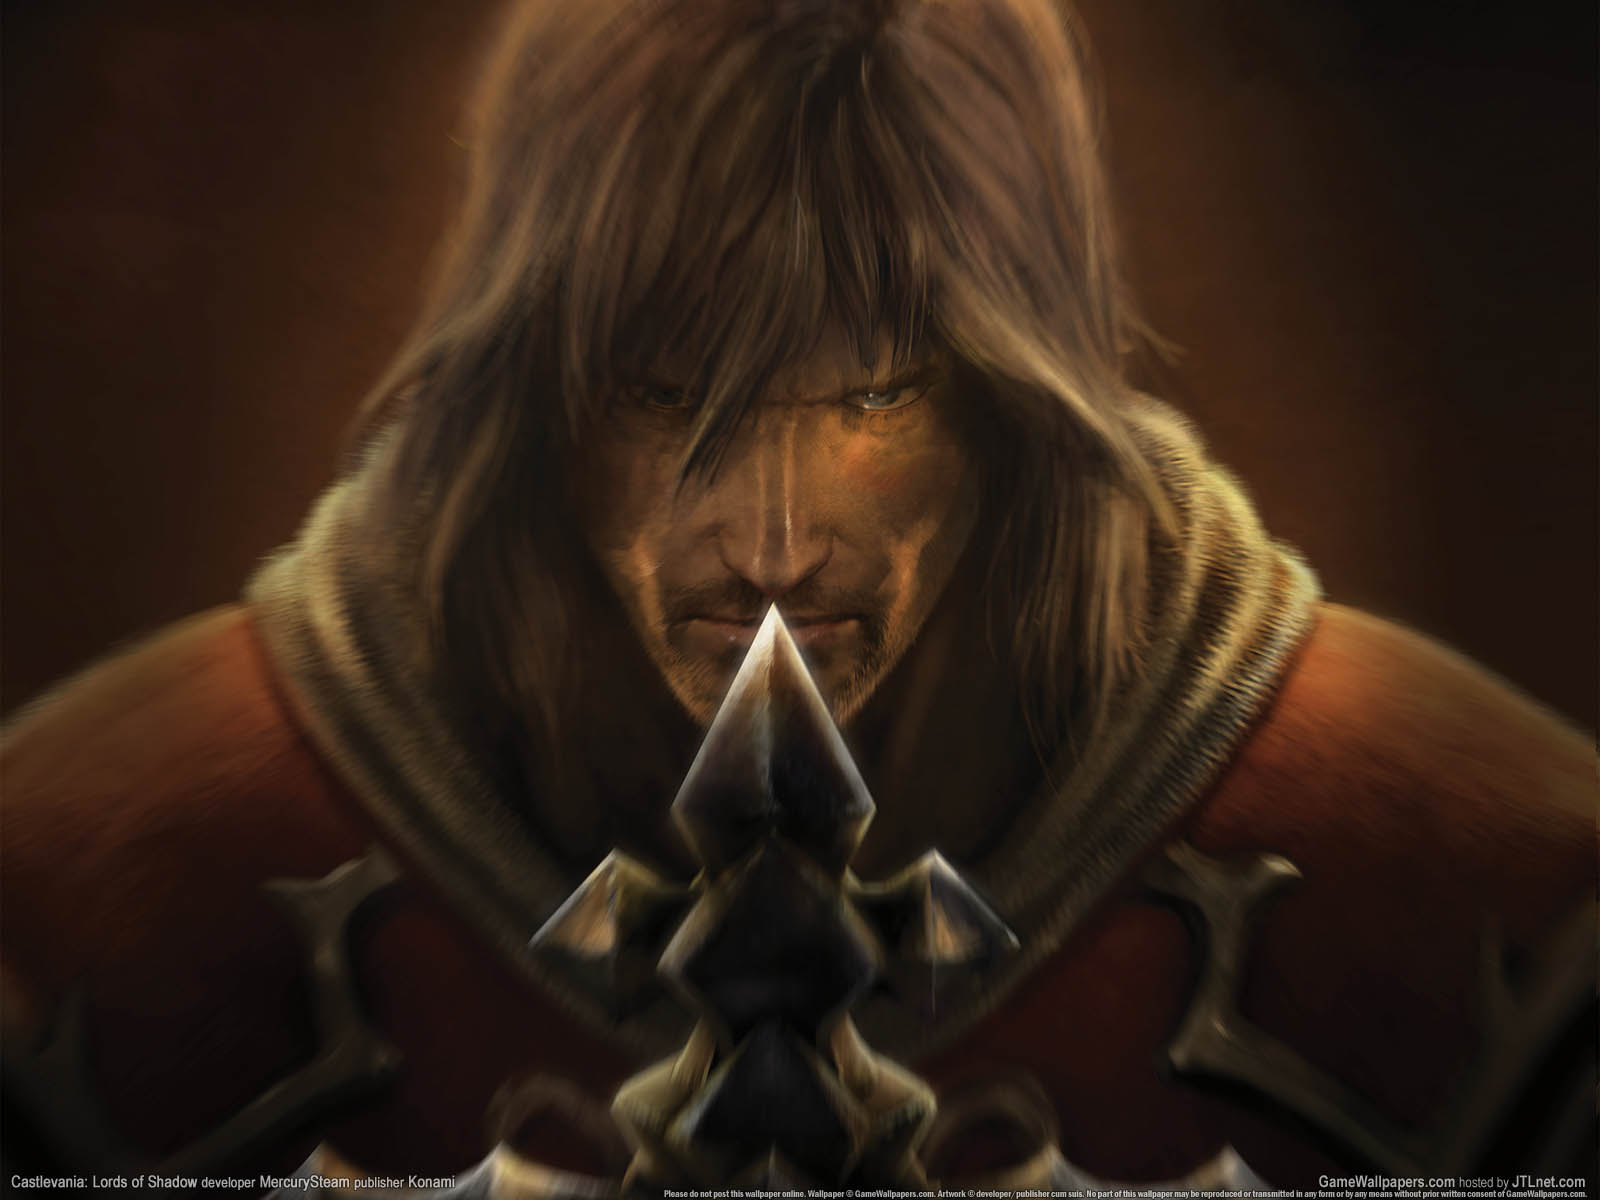 Castlevania%3A Lords of Shadow wallpaper 01 1600x1200